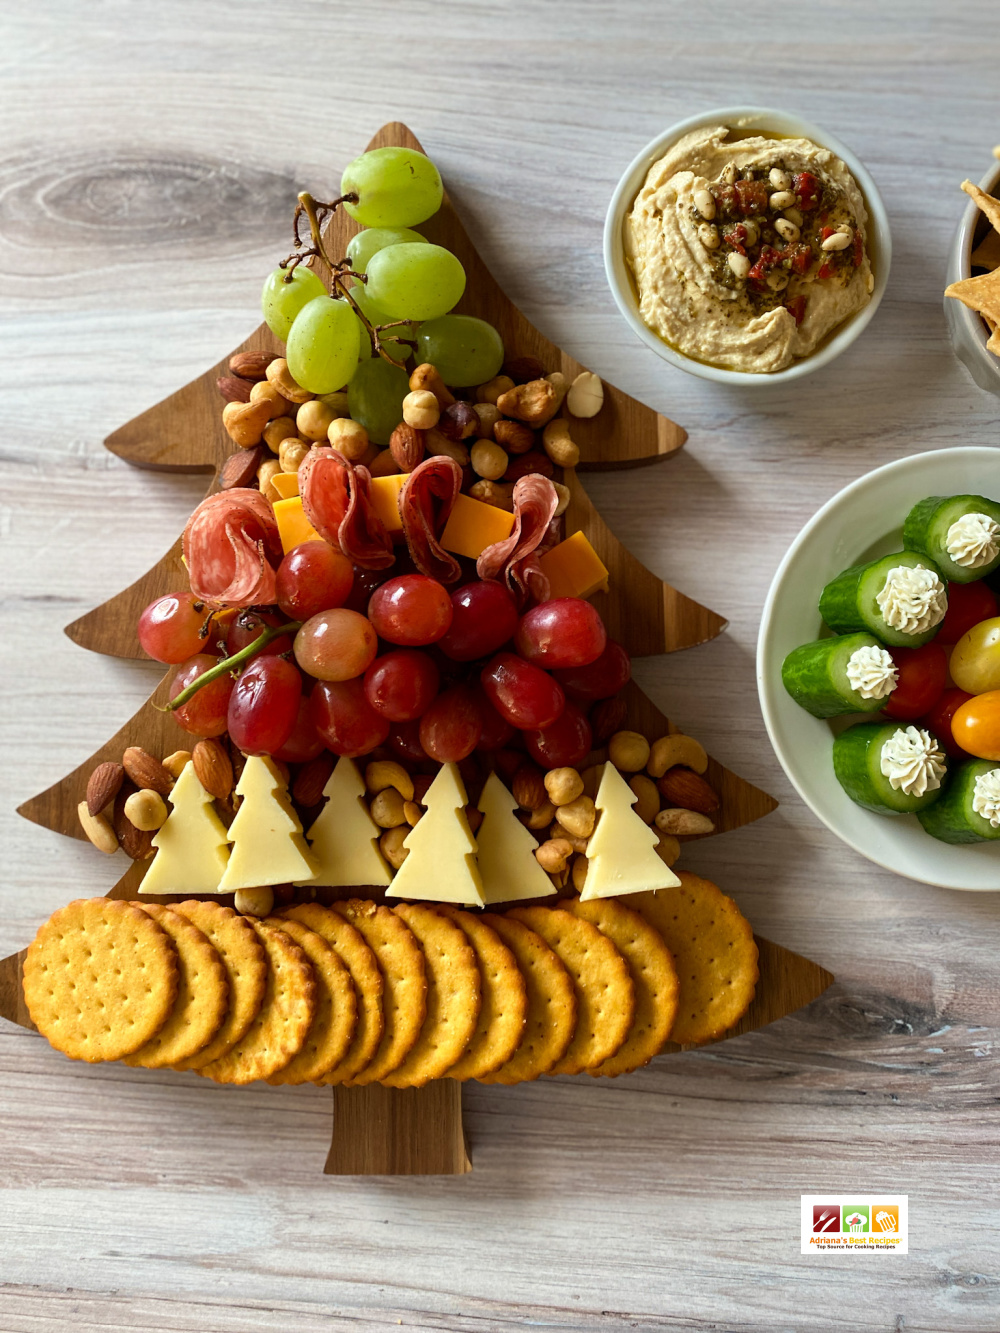 A holiday charcuterie board for small gatherings